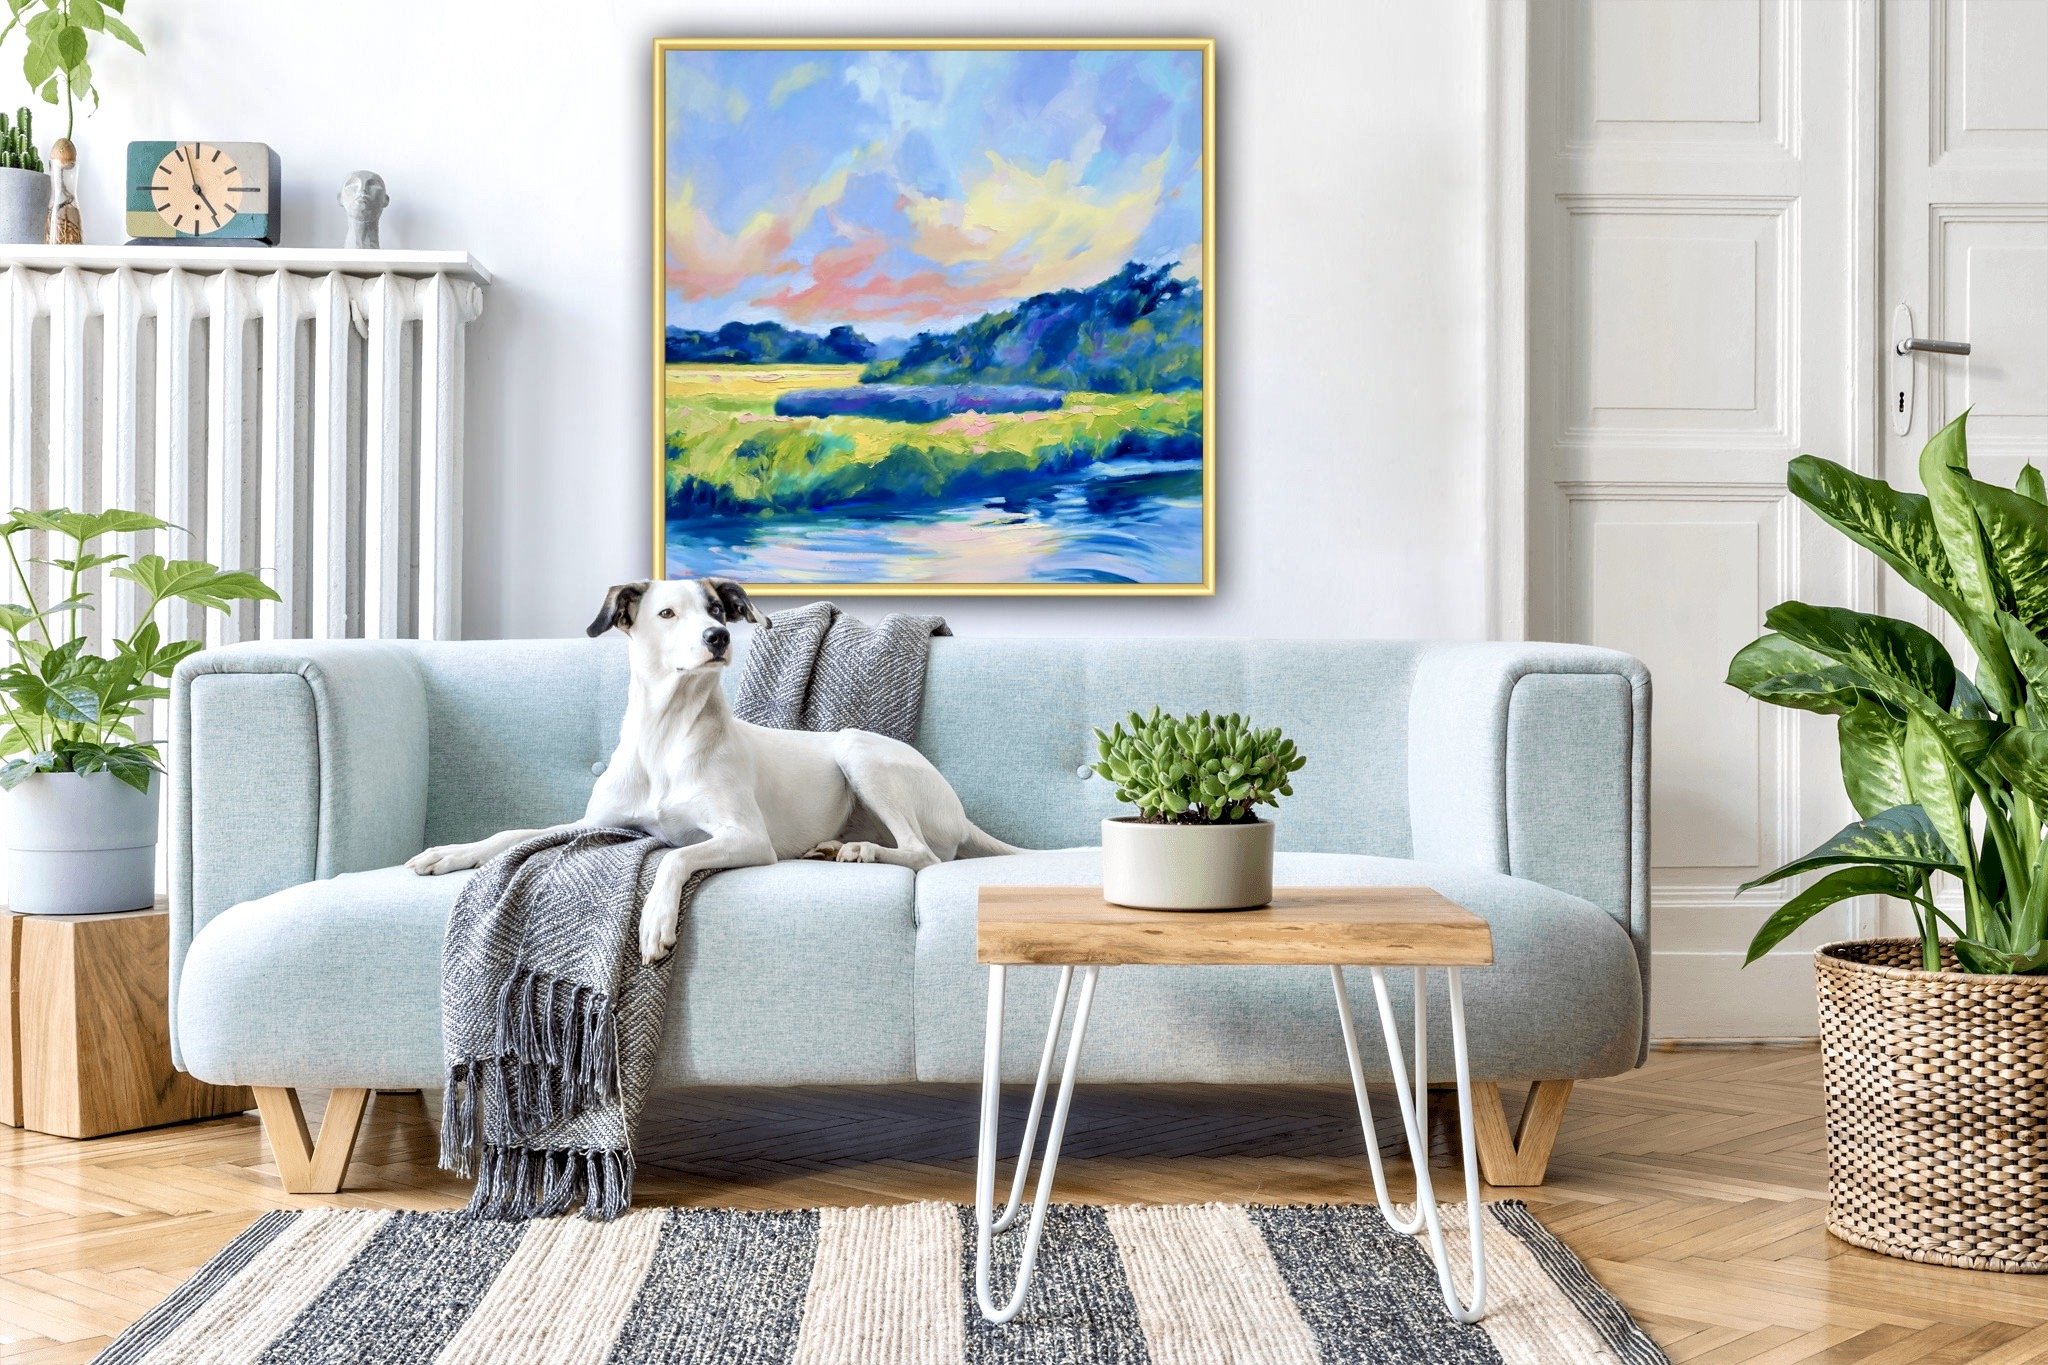 Arrival-KatiePodracky-staged-art-for-the-home.JPG